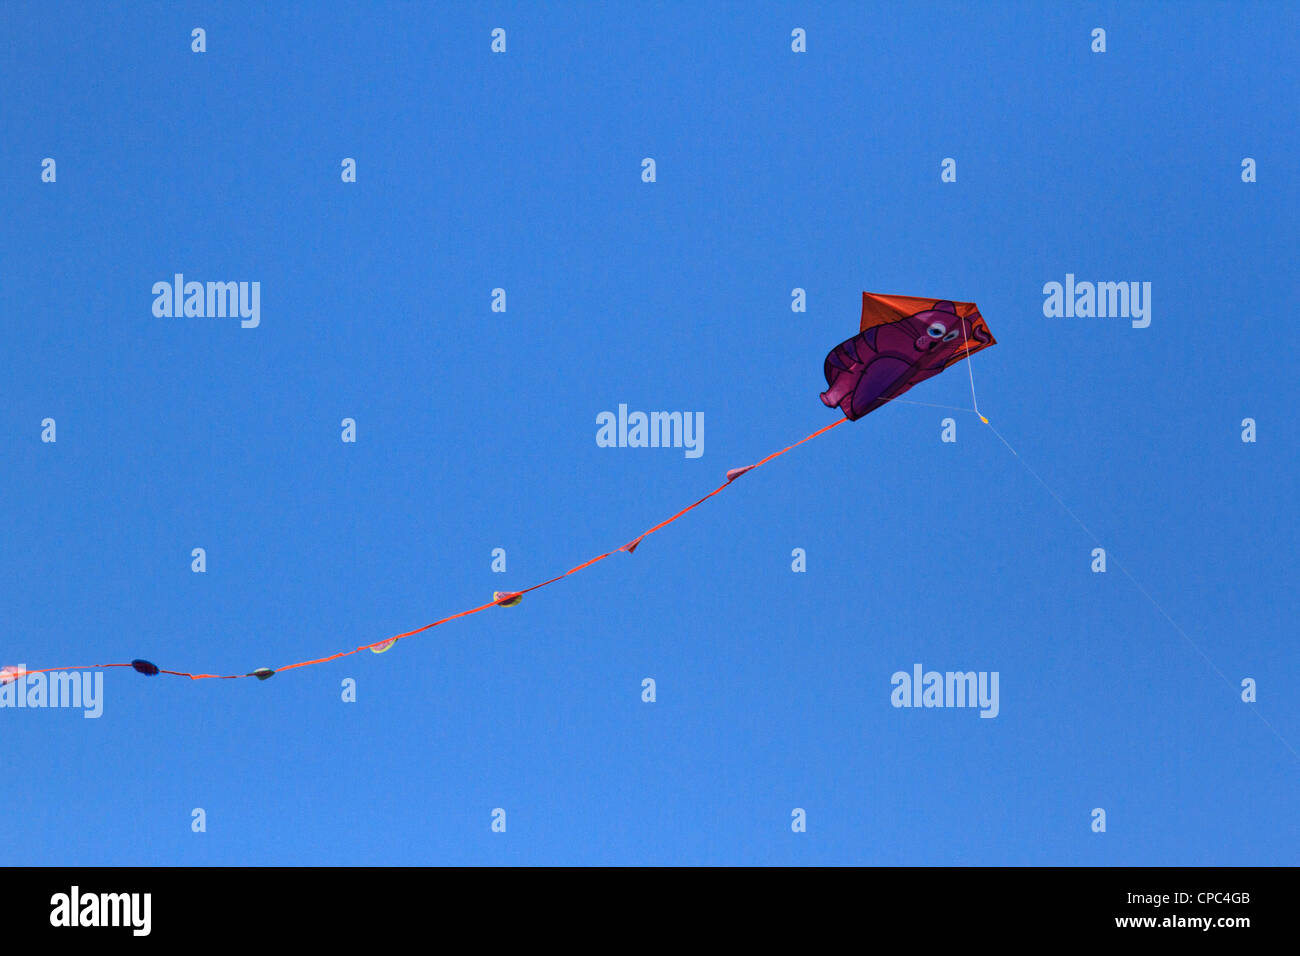 Kite flying against a clear, blue, cloudless sky. Stock Photo